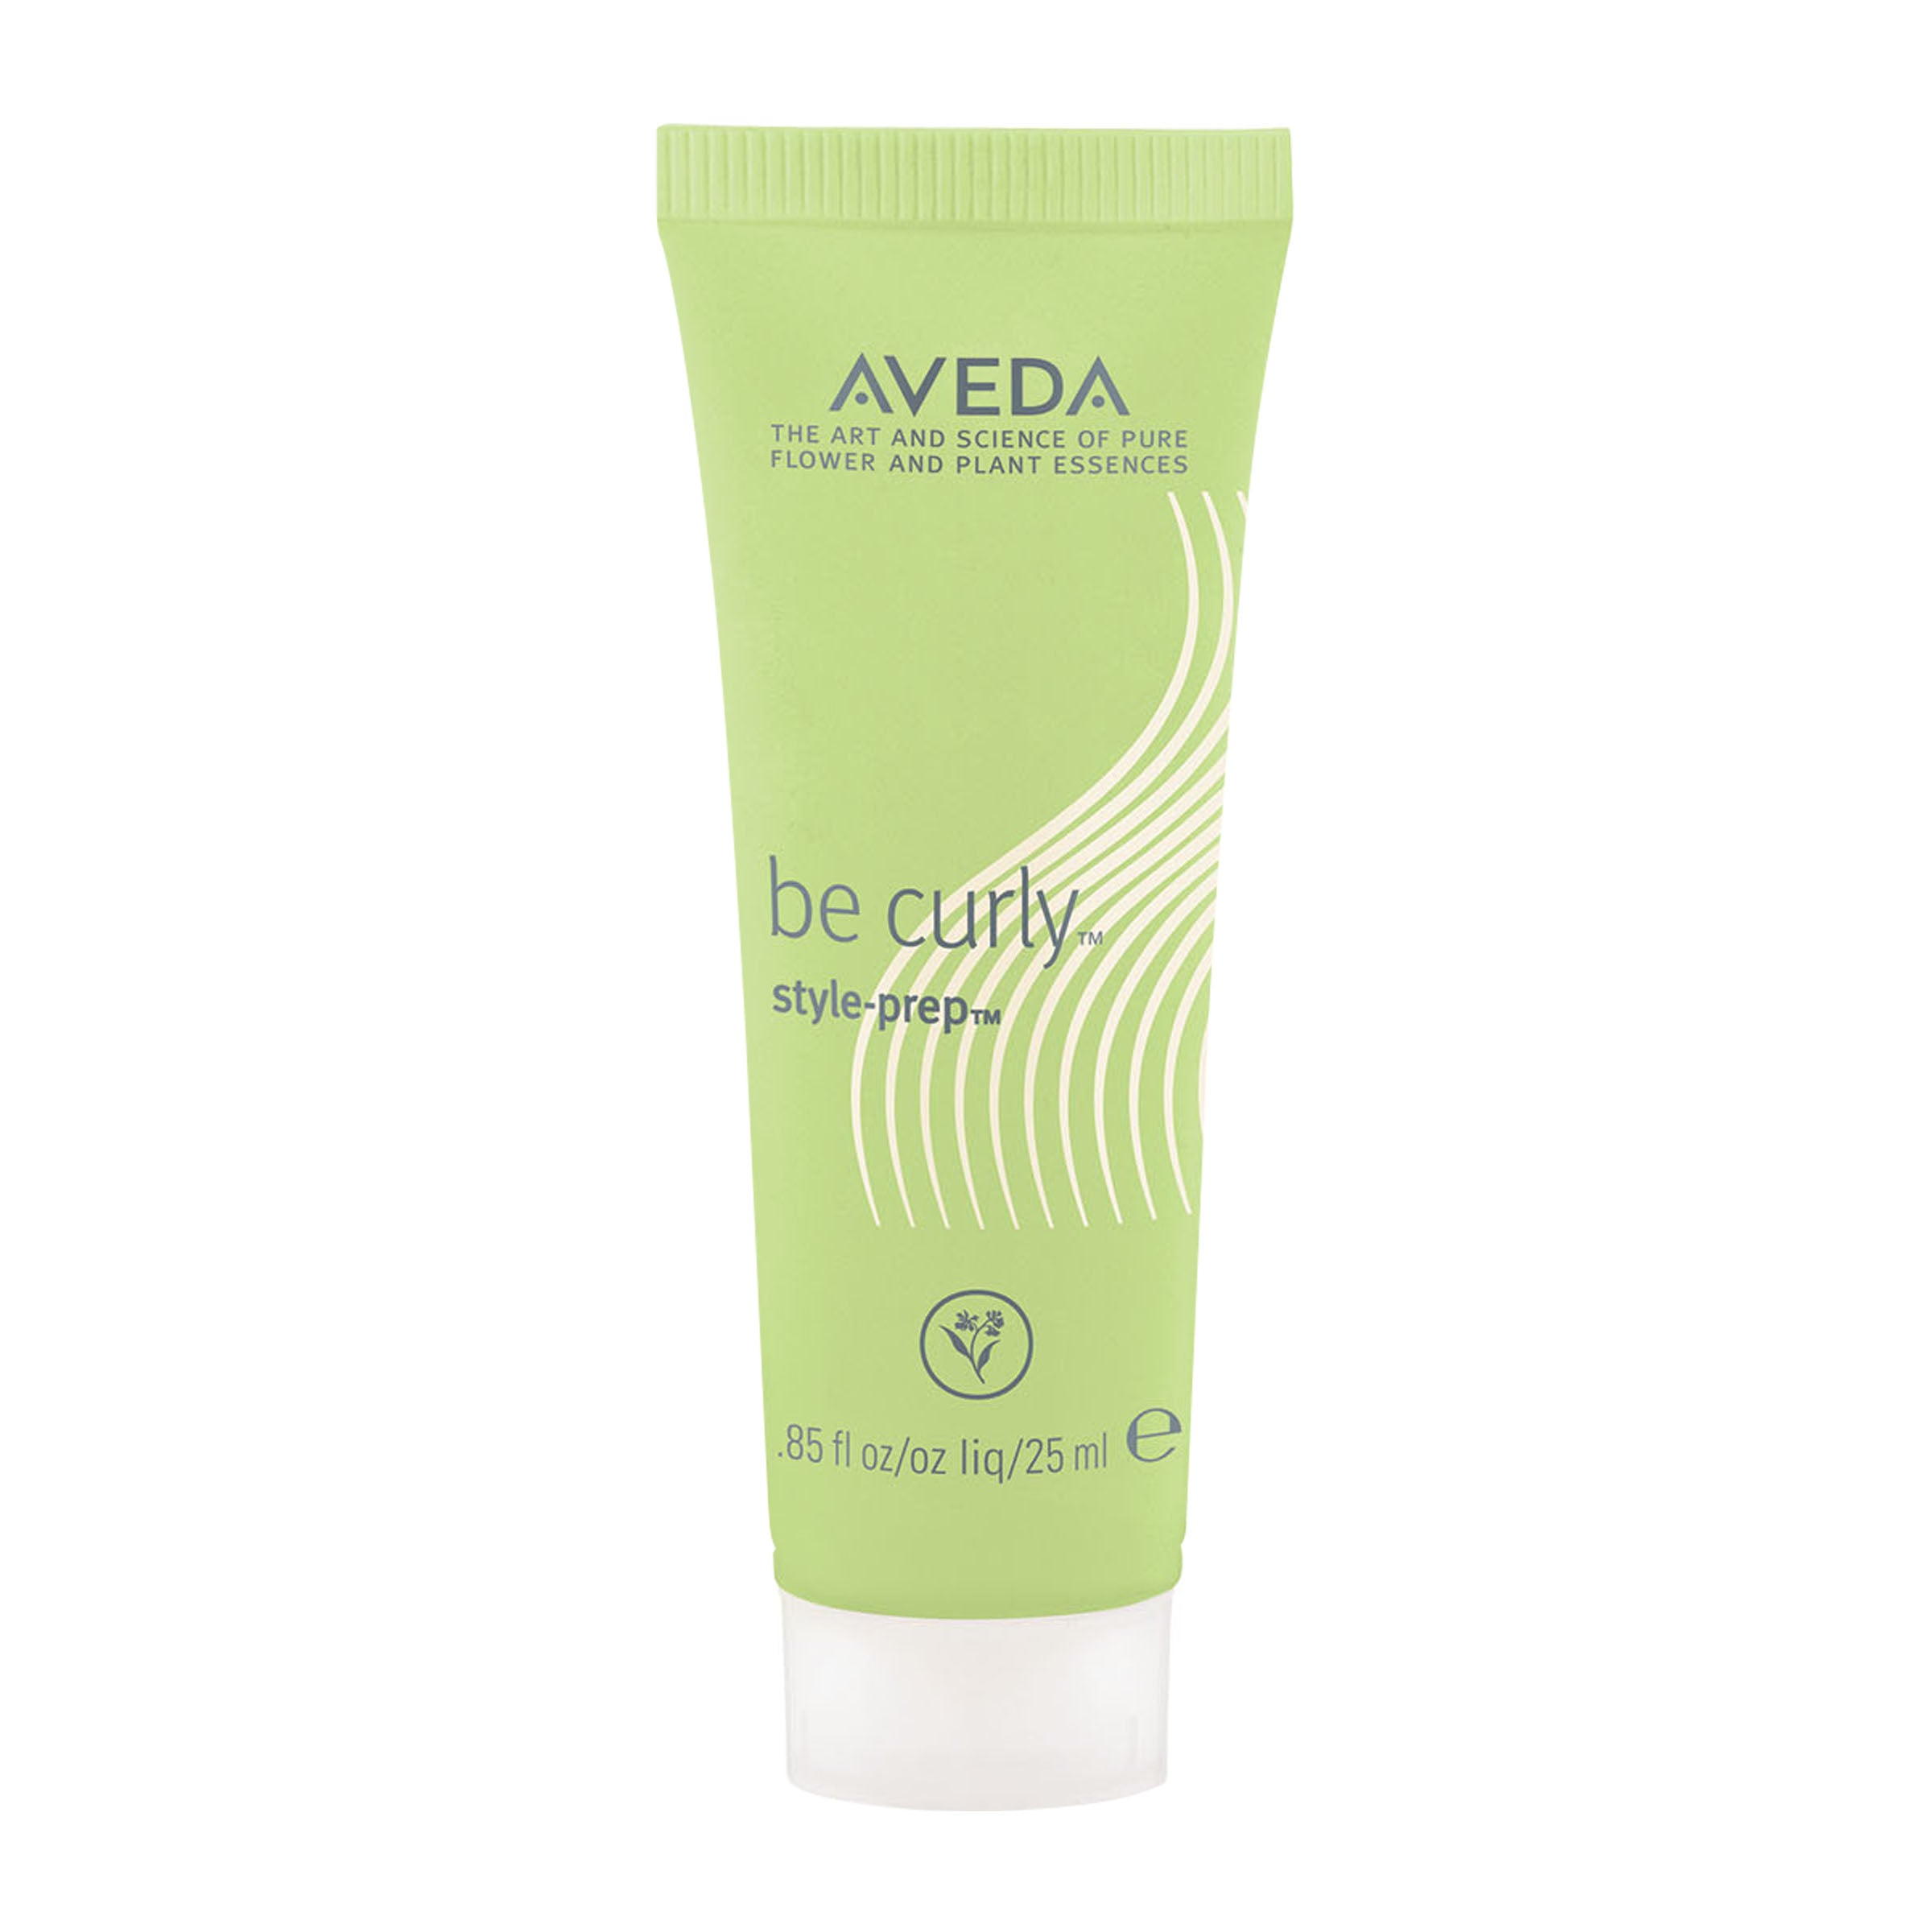 aveda be curly™ style-prep™ travel size